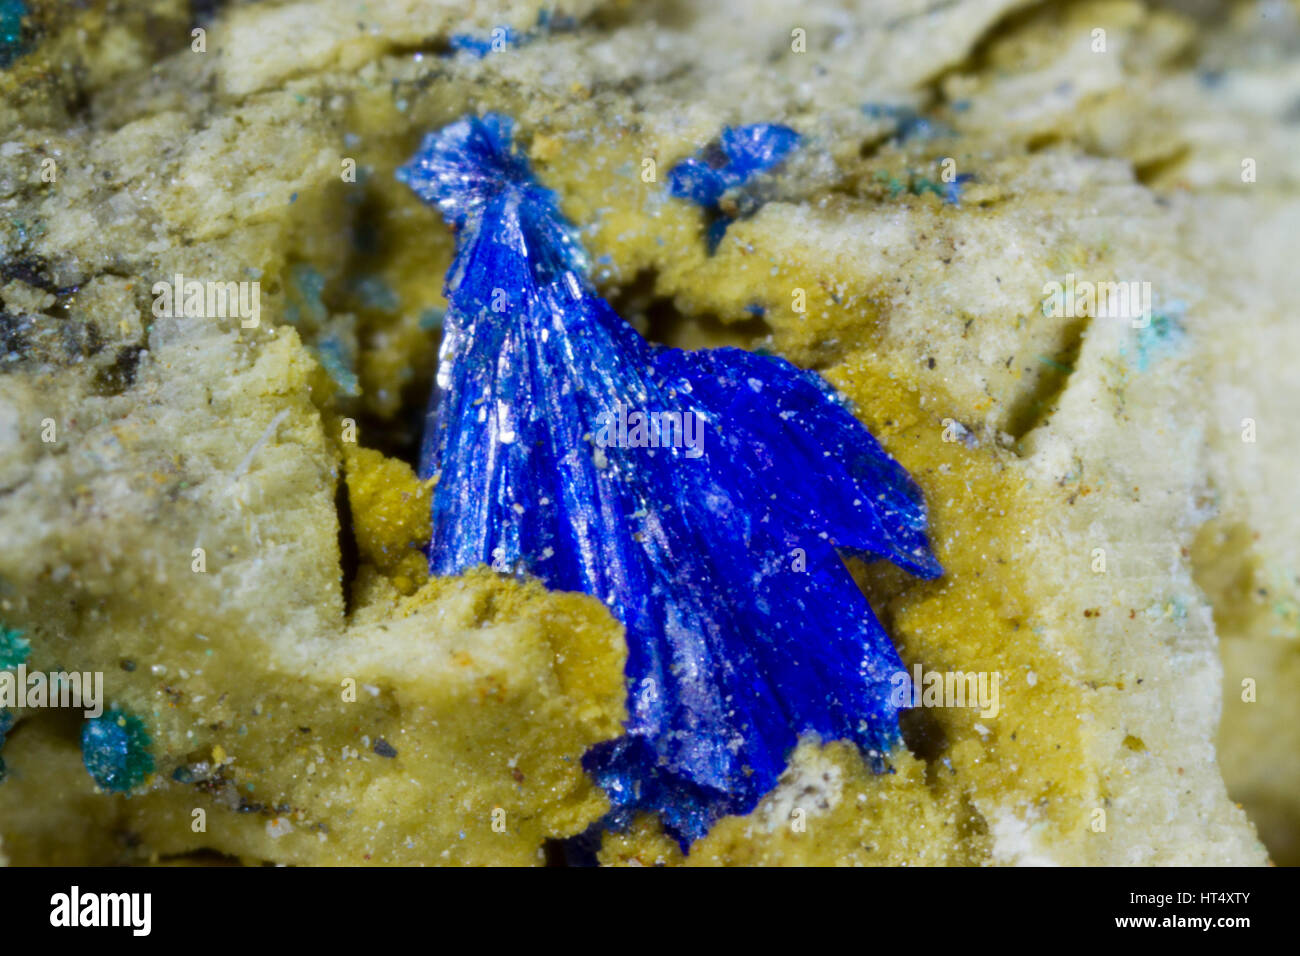 Linarite (lead copper sulphate hydroxide)  crystals. From the Eaglebrook mine, Ceredigion, Wales. Stock Photo